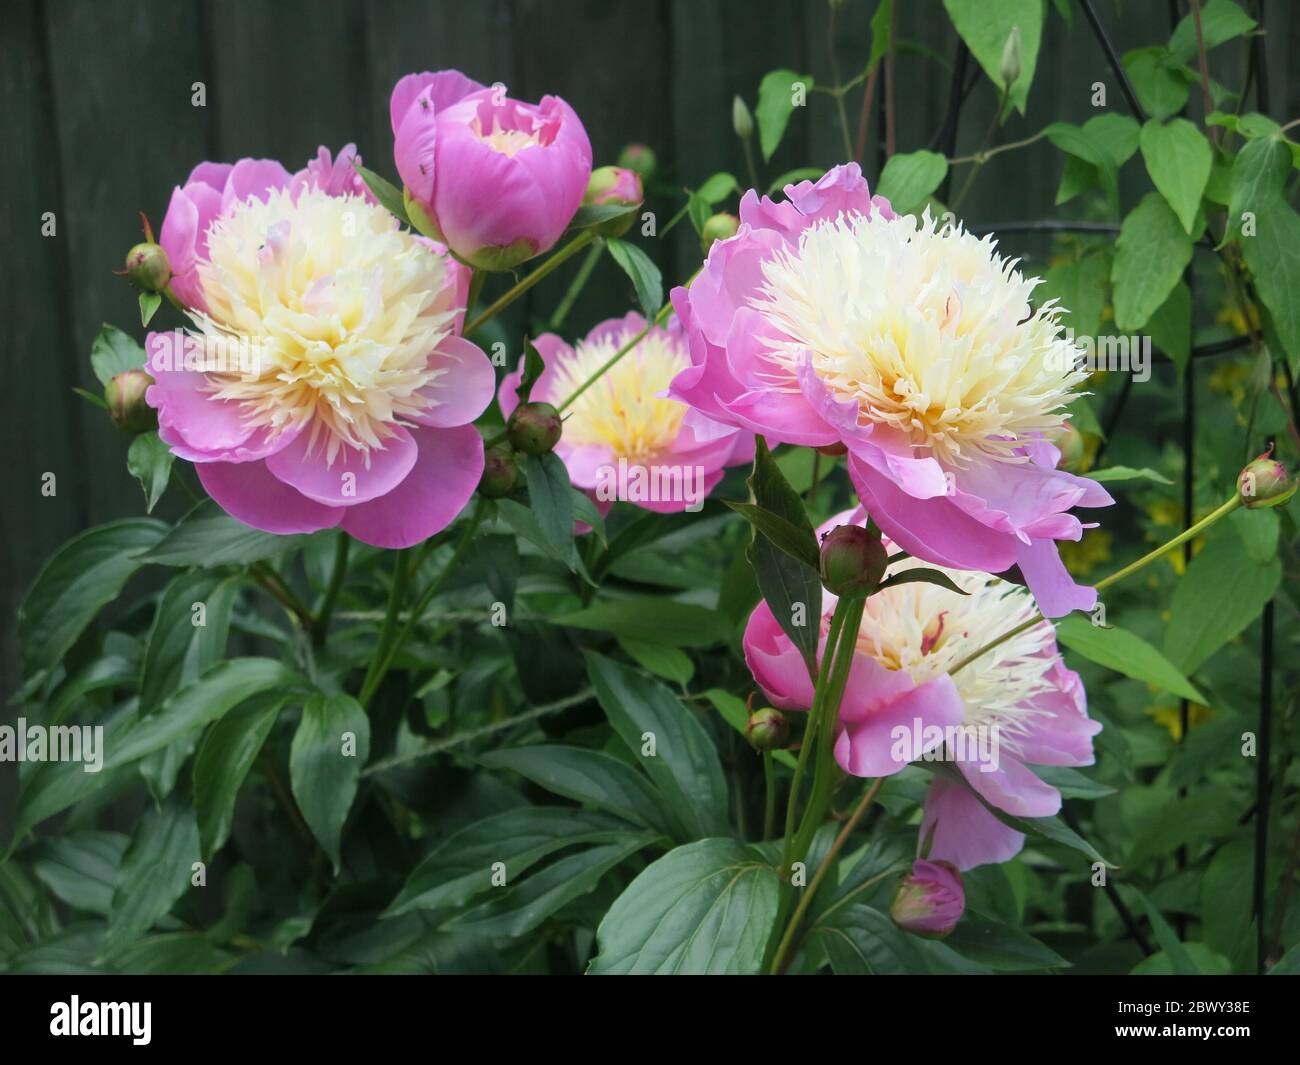 Paeonia Lactiflora 'Bowl of Beauty' is a striking peony for the herbaceous border of an English garden, with vibrant yellow and pink flower heads. Stock Photo